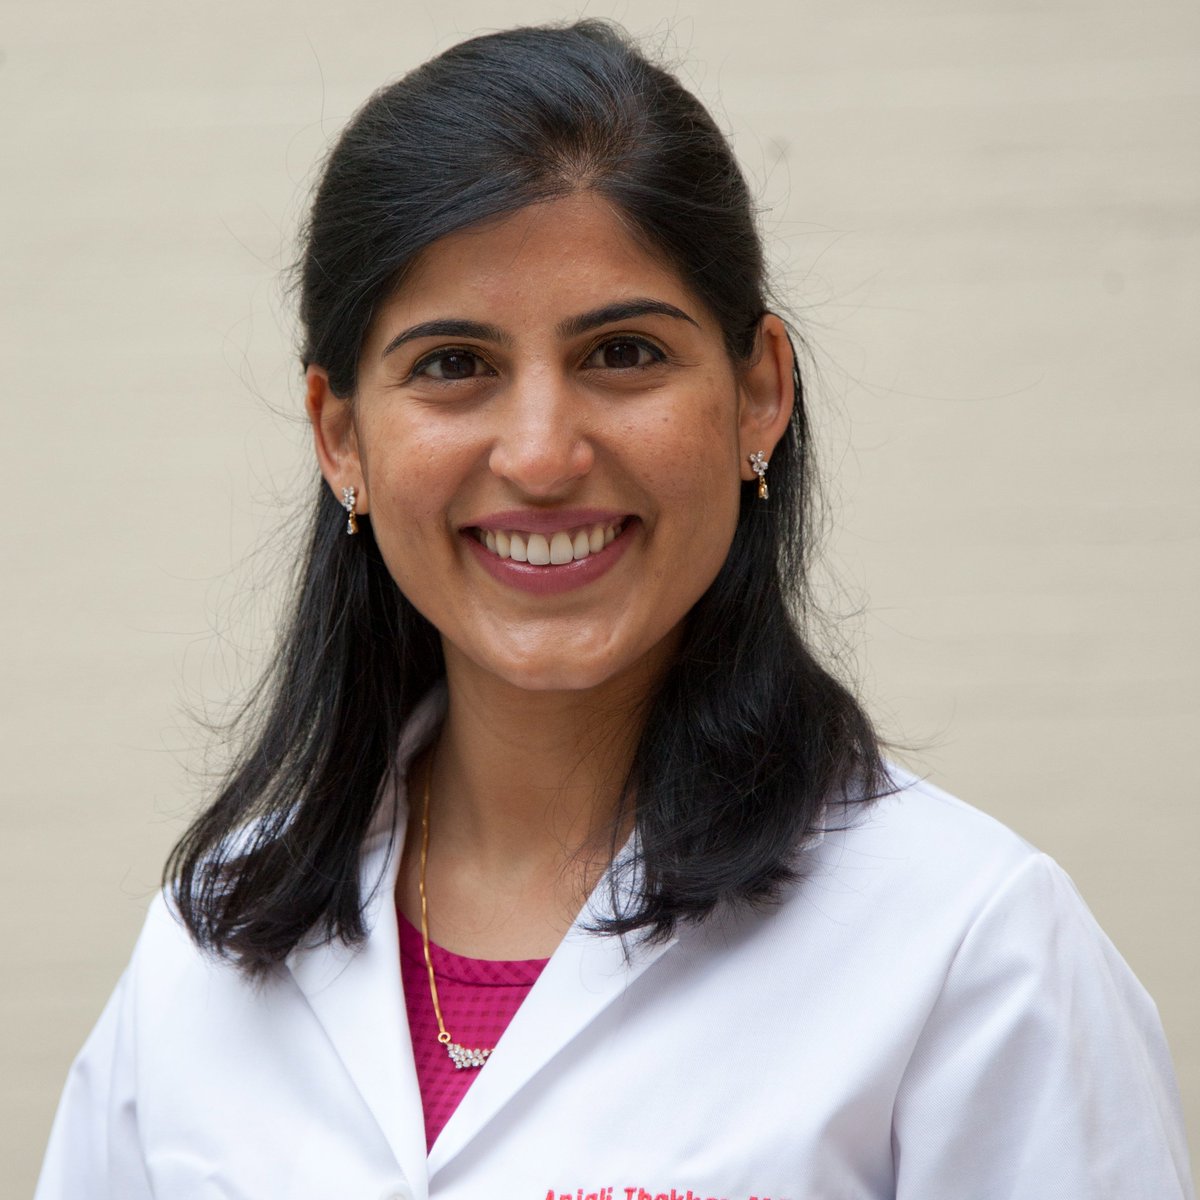 Congrats Dr. @anjalibthakkar on being appointed to the @ACCinTouch Digital Transformation Committee. The ACC committee aims to create a digital-first ecosystem in the implementation of cardiovascular care and to guide digital strategy, risk management and innovation. #WIC